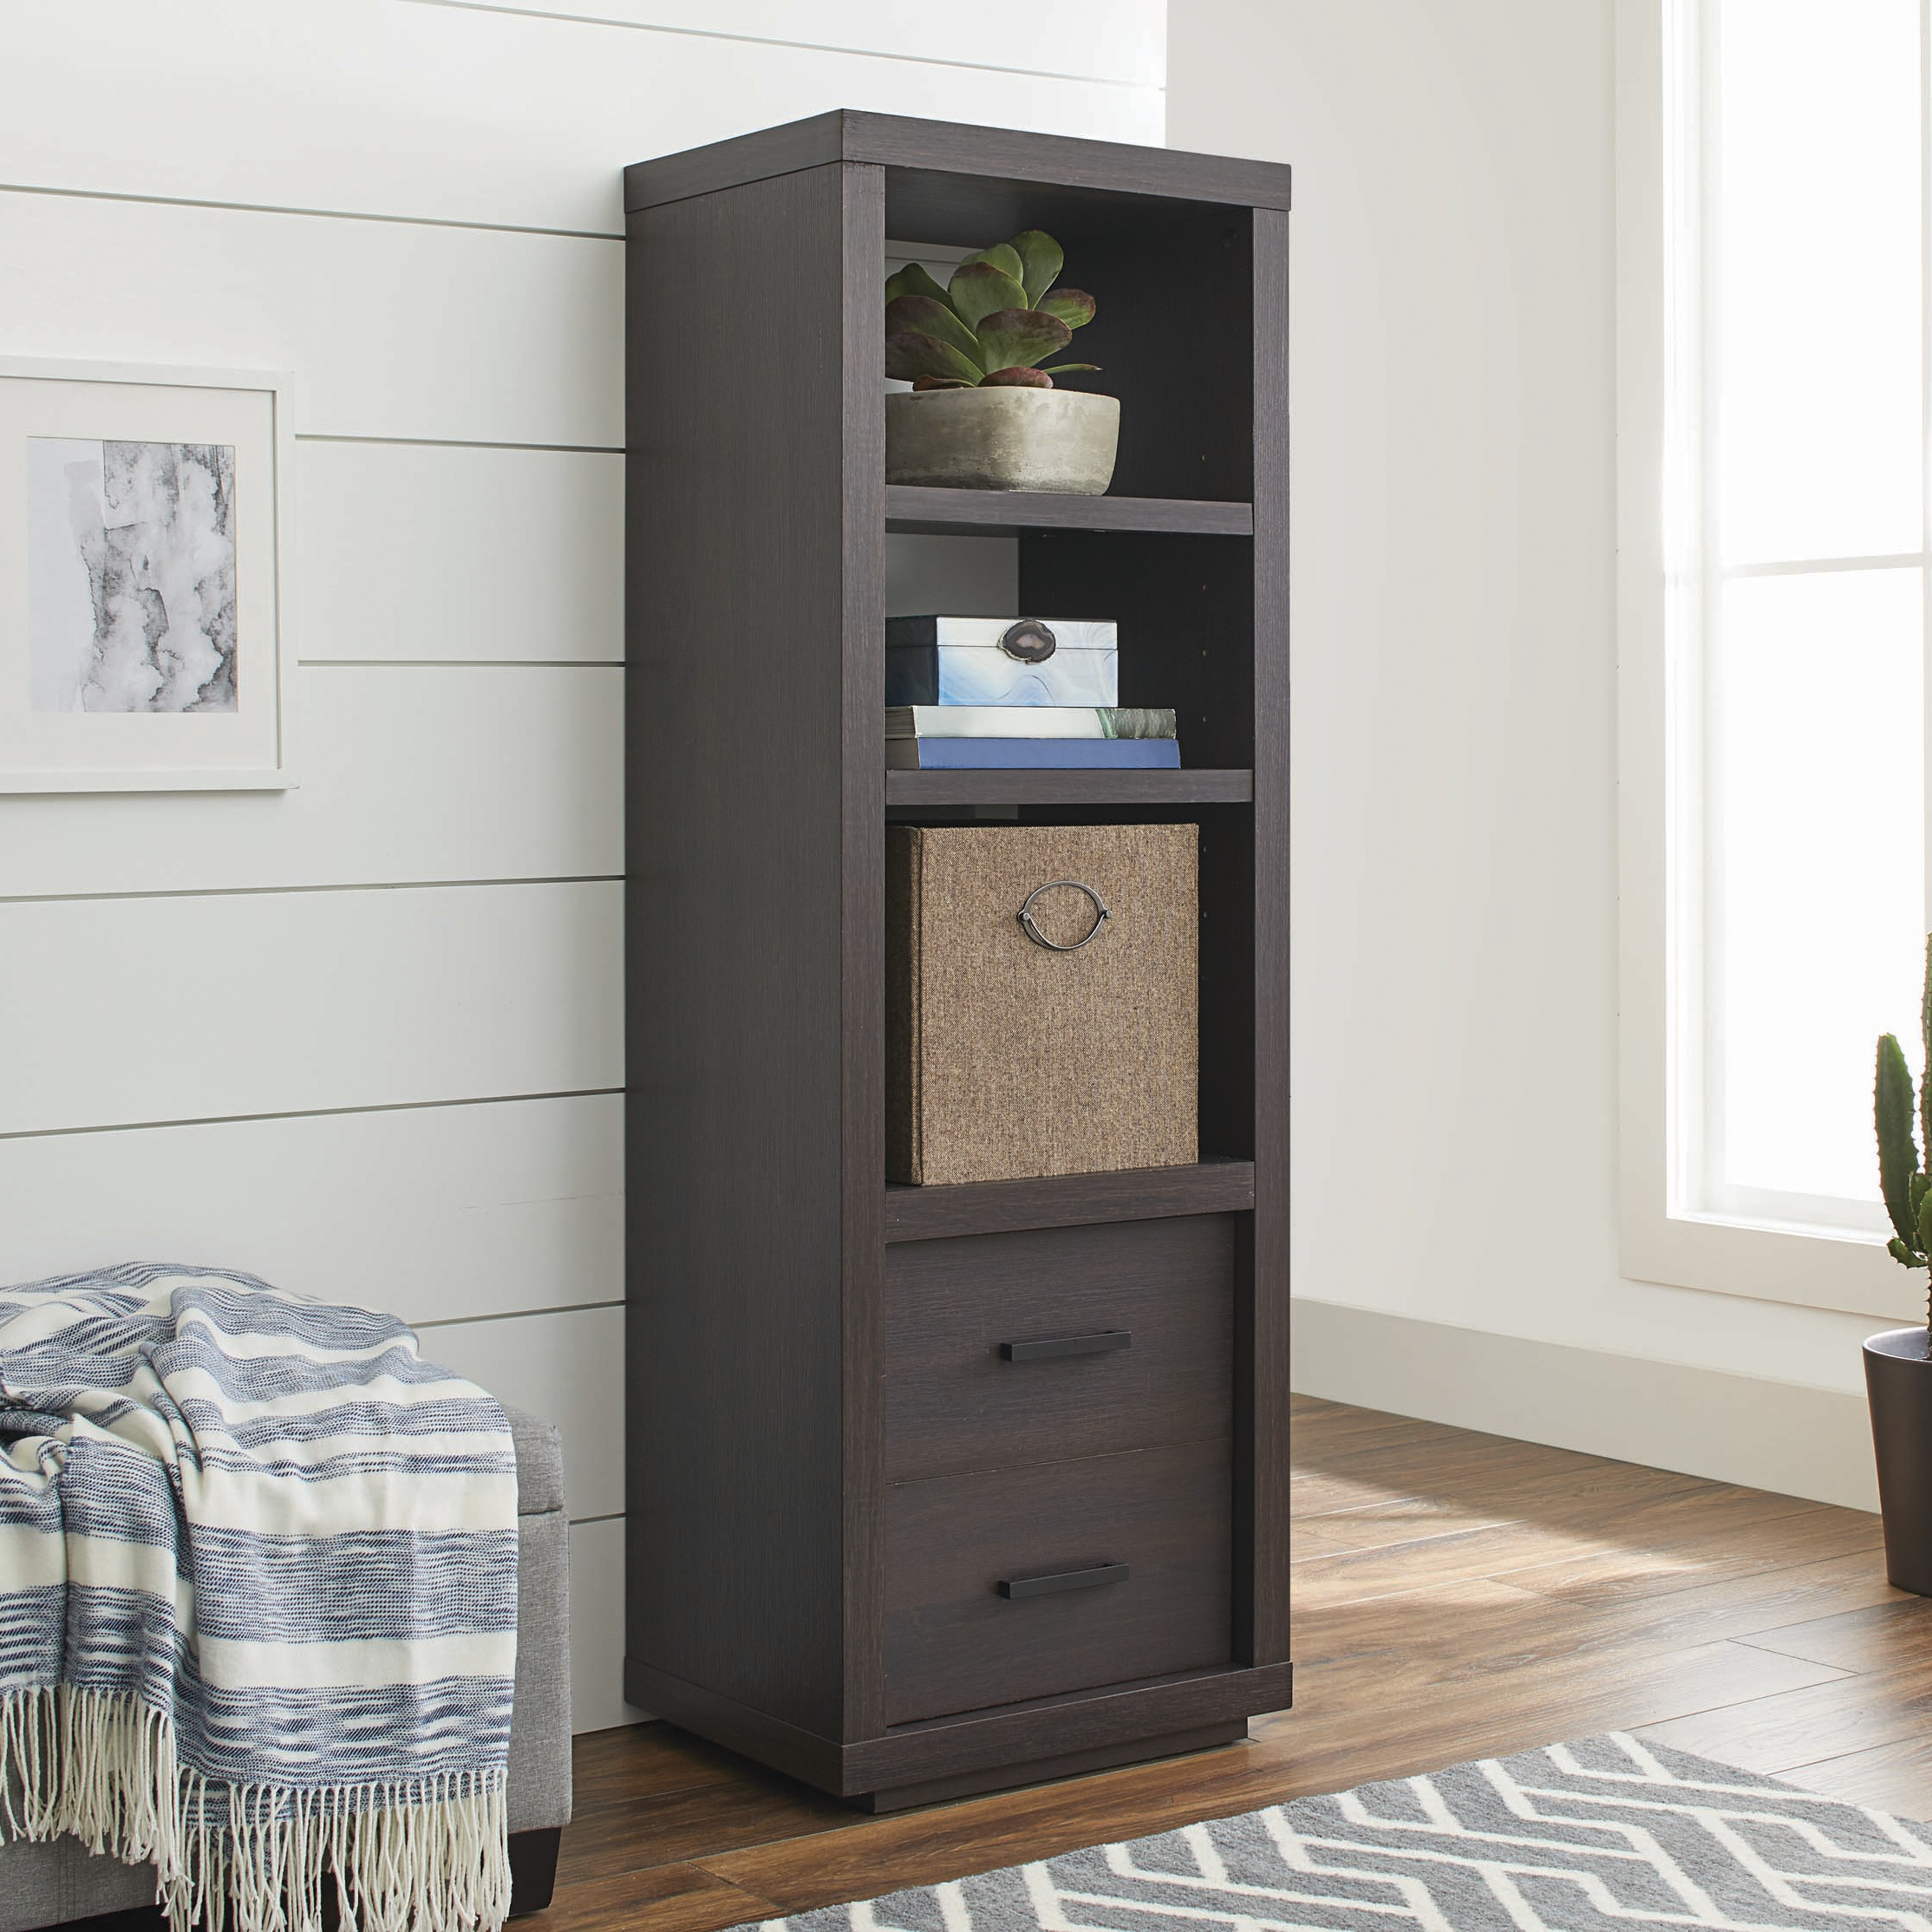 Better Homes & Gardens Steele Storage Bookcase - image 1 of 10